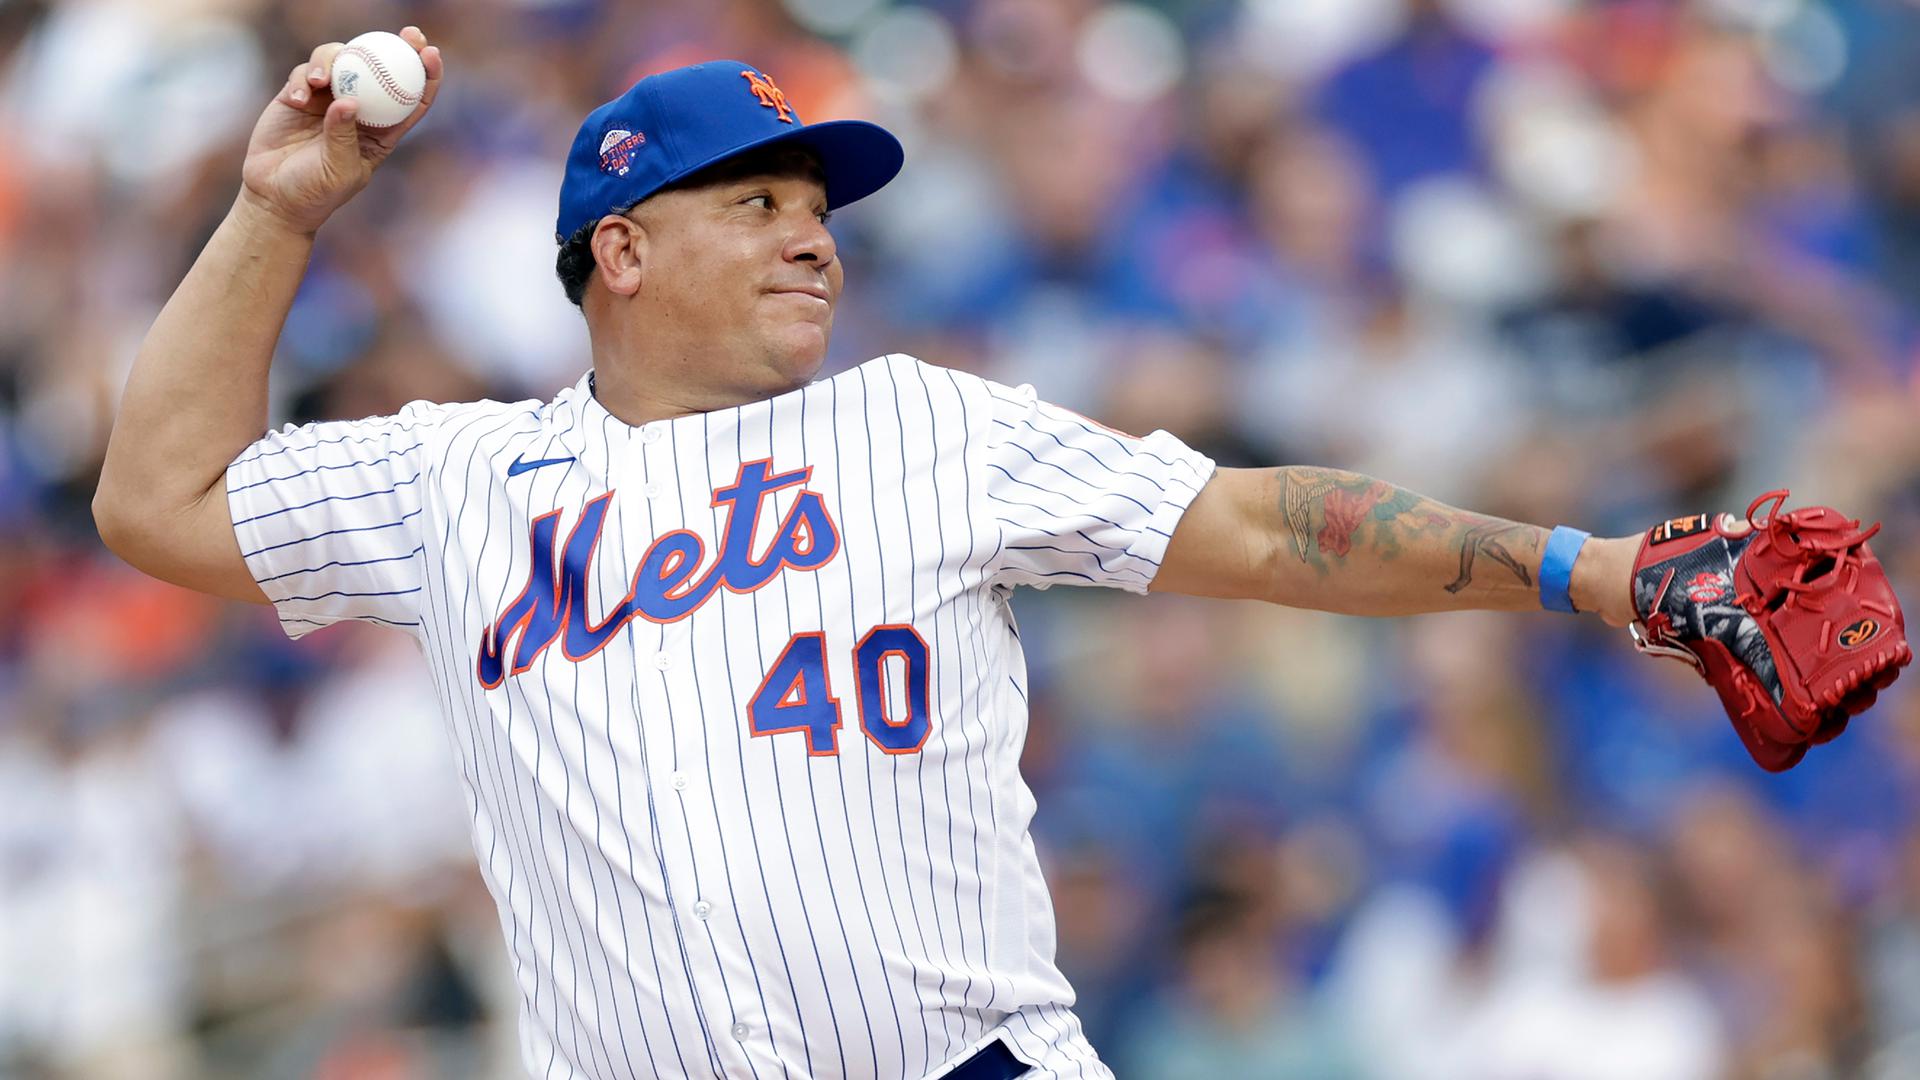 Bartolo Colon pitches in a Mets Old-Timers Game